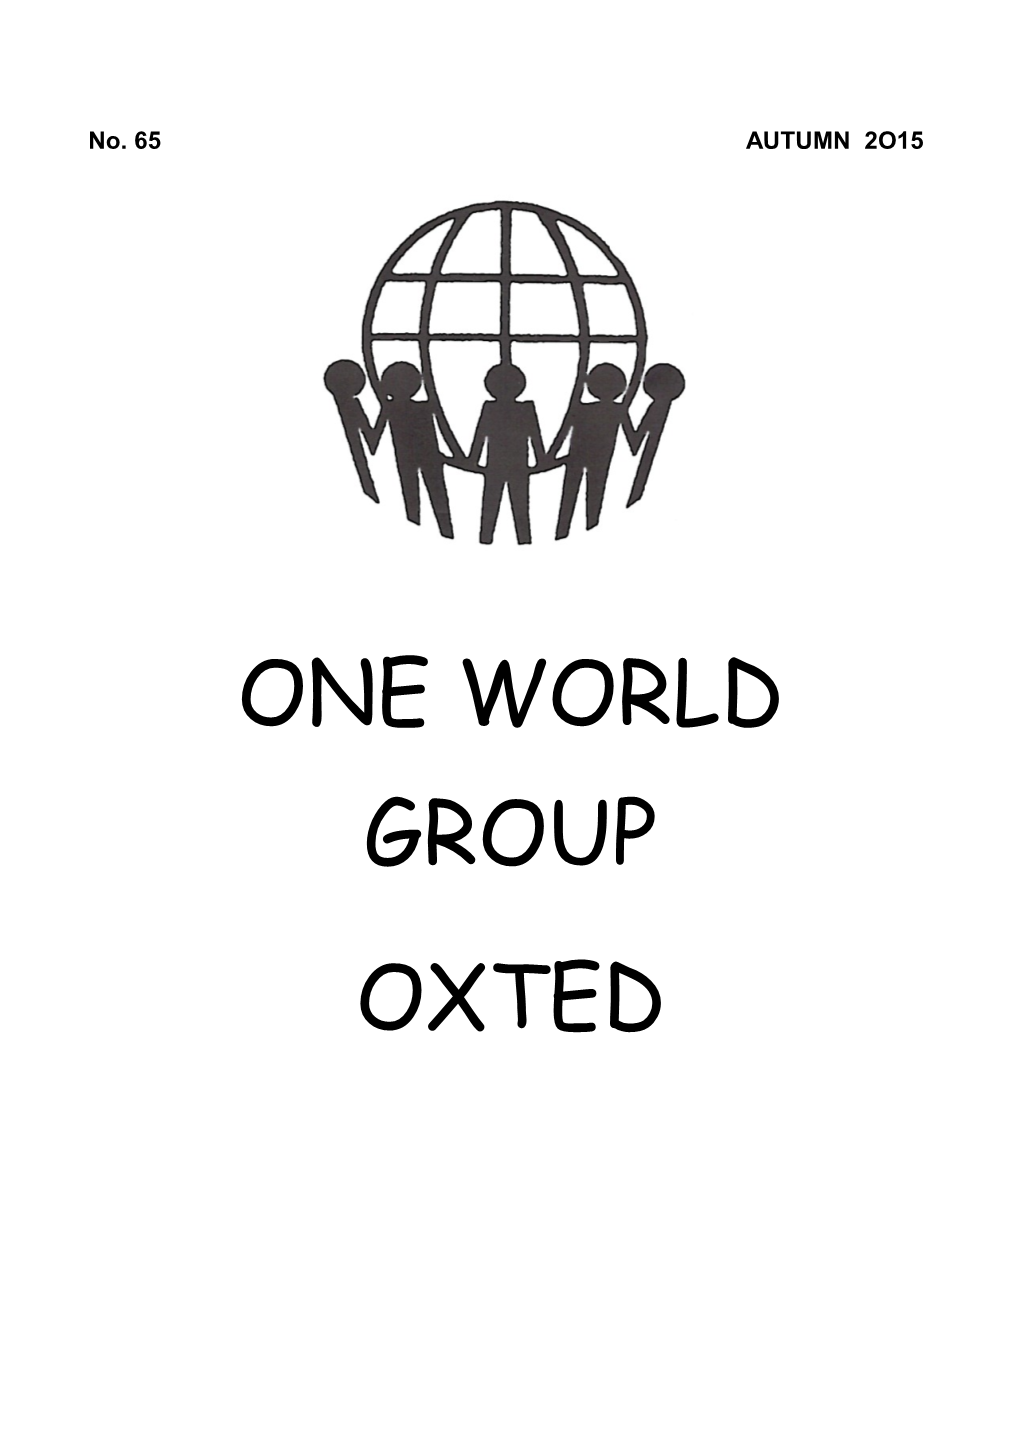 Dear Friends of Oxted One World Group